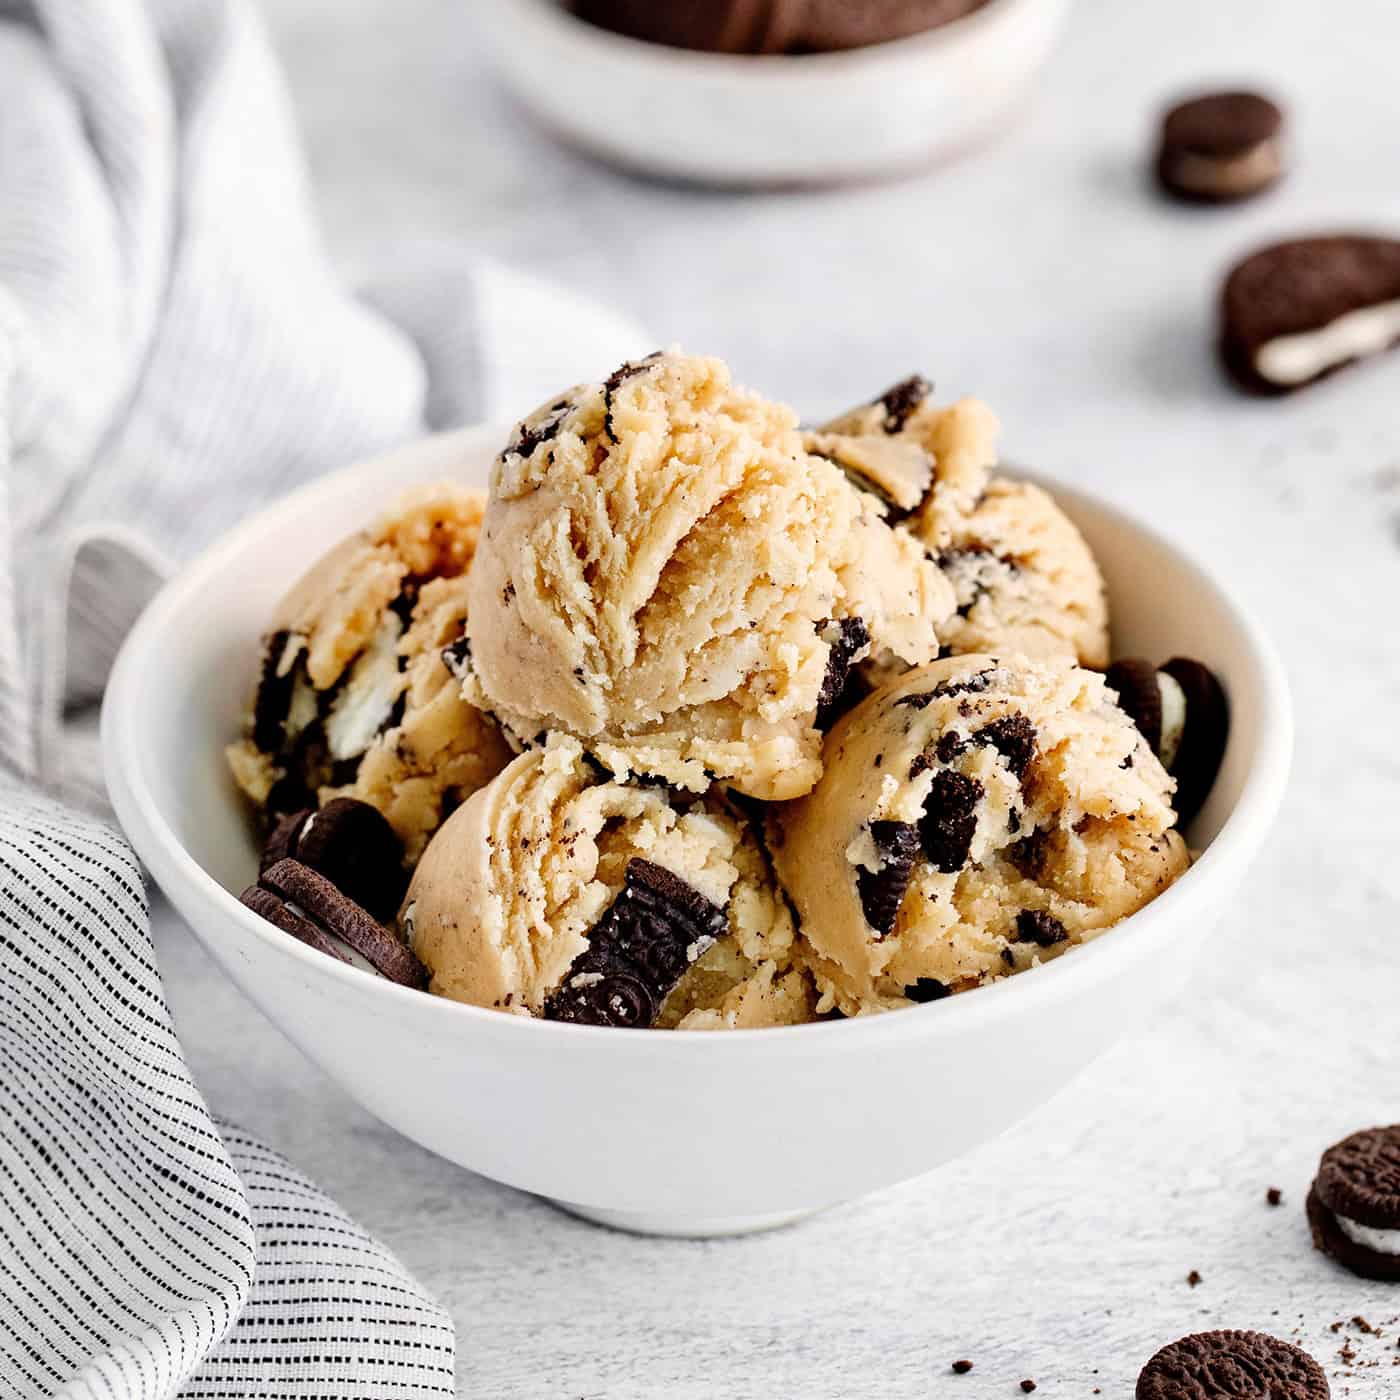 A bowl with scoops of edible Oreo cookie dough